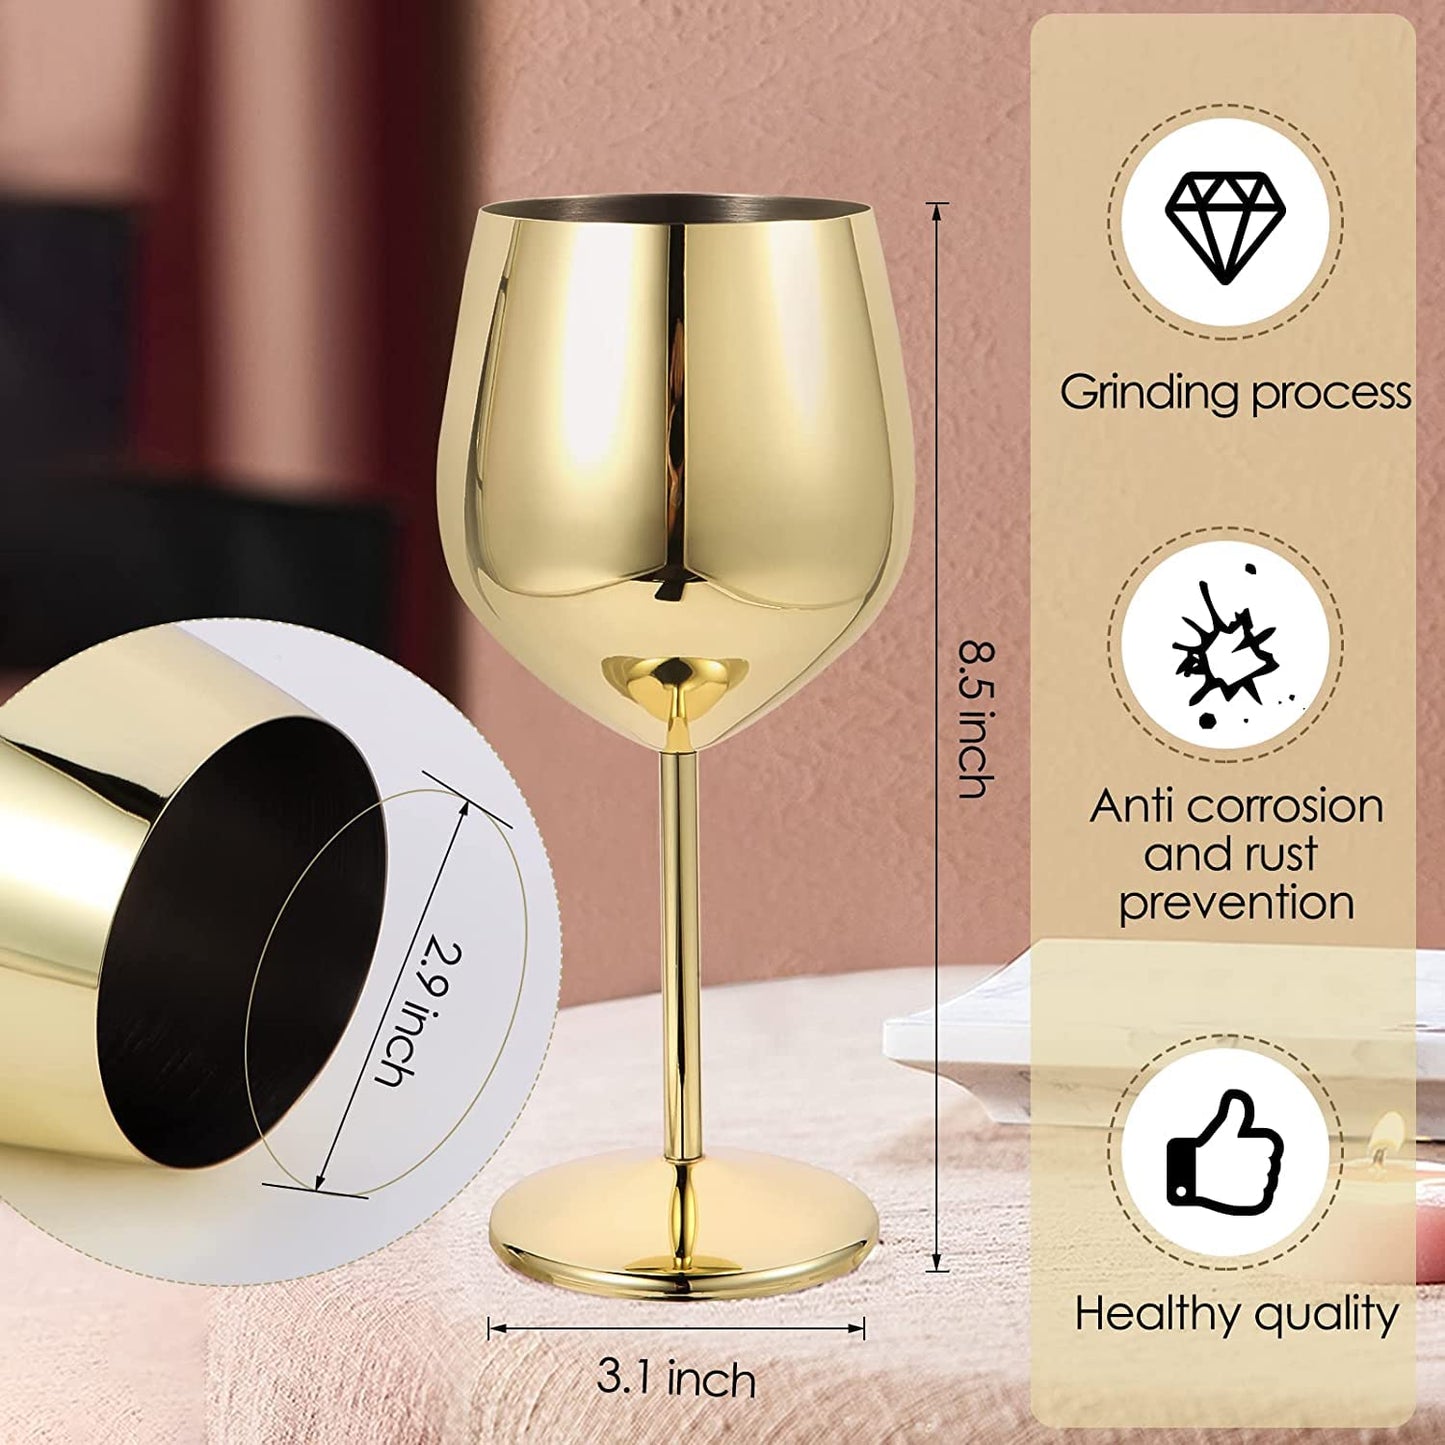 Rudra Exports Stainless Steel Stemmed Wine Glasses 350 ml, Unbreakable Wine Glass Goblets, Gift for Men and Women, Party Glasses - 350 ml (Gold)